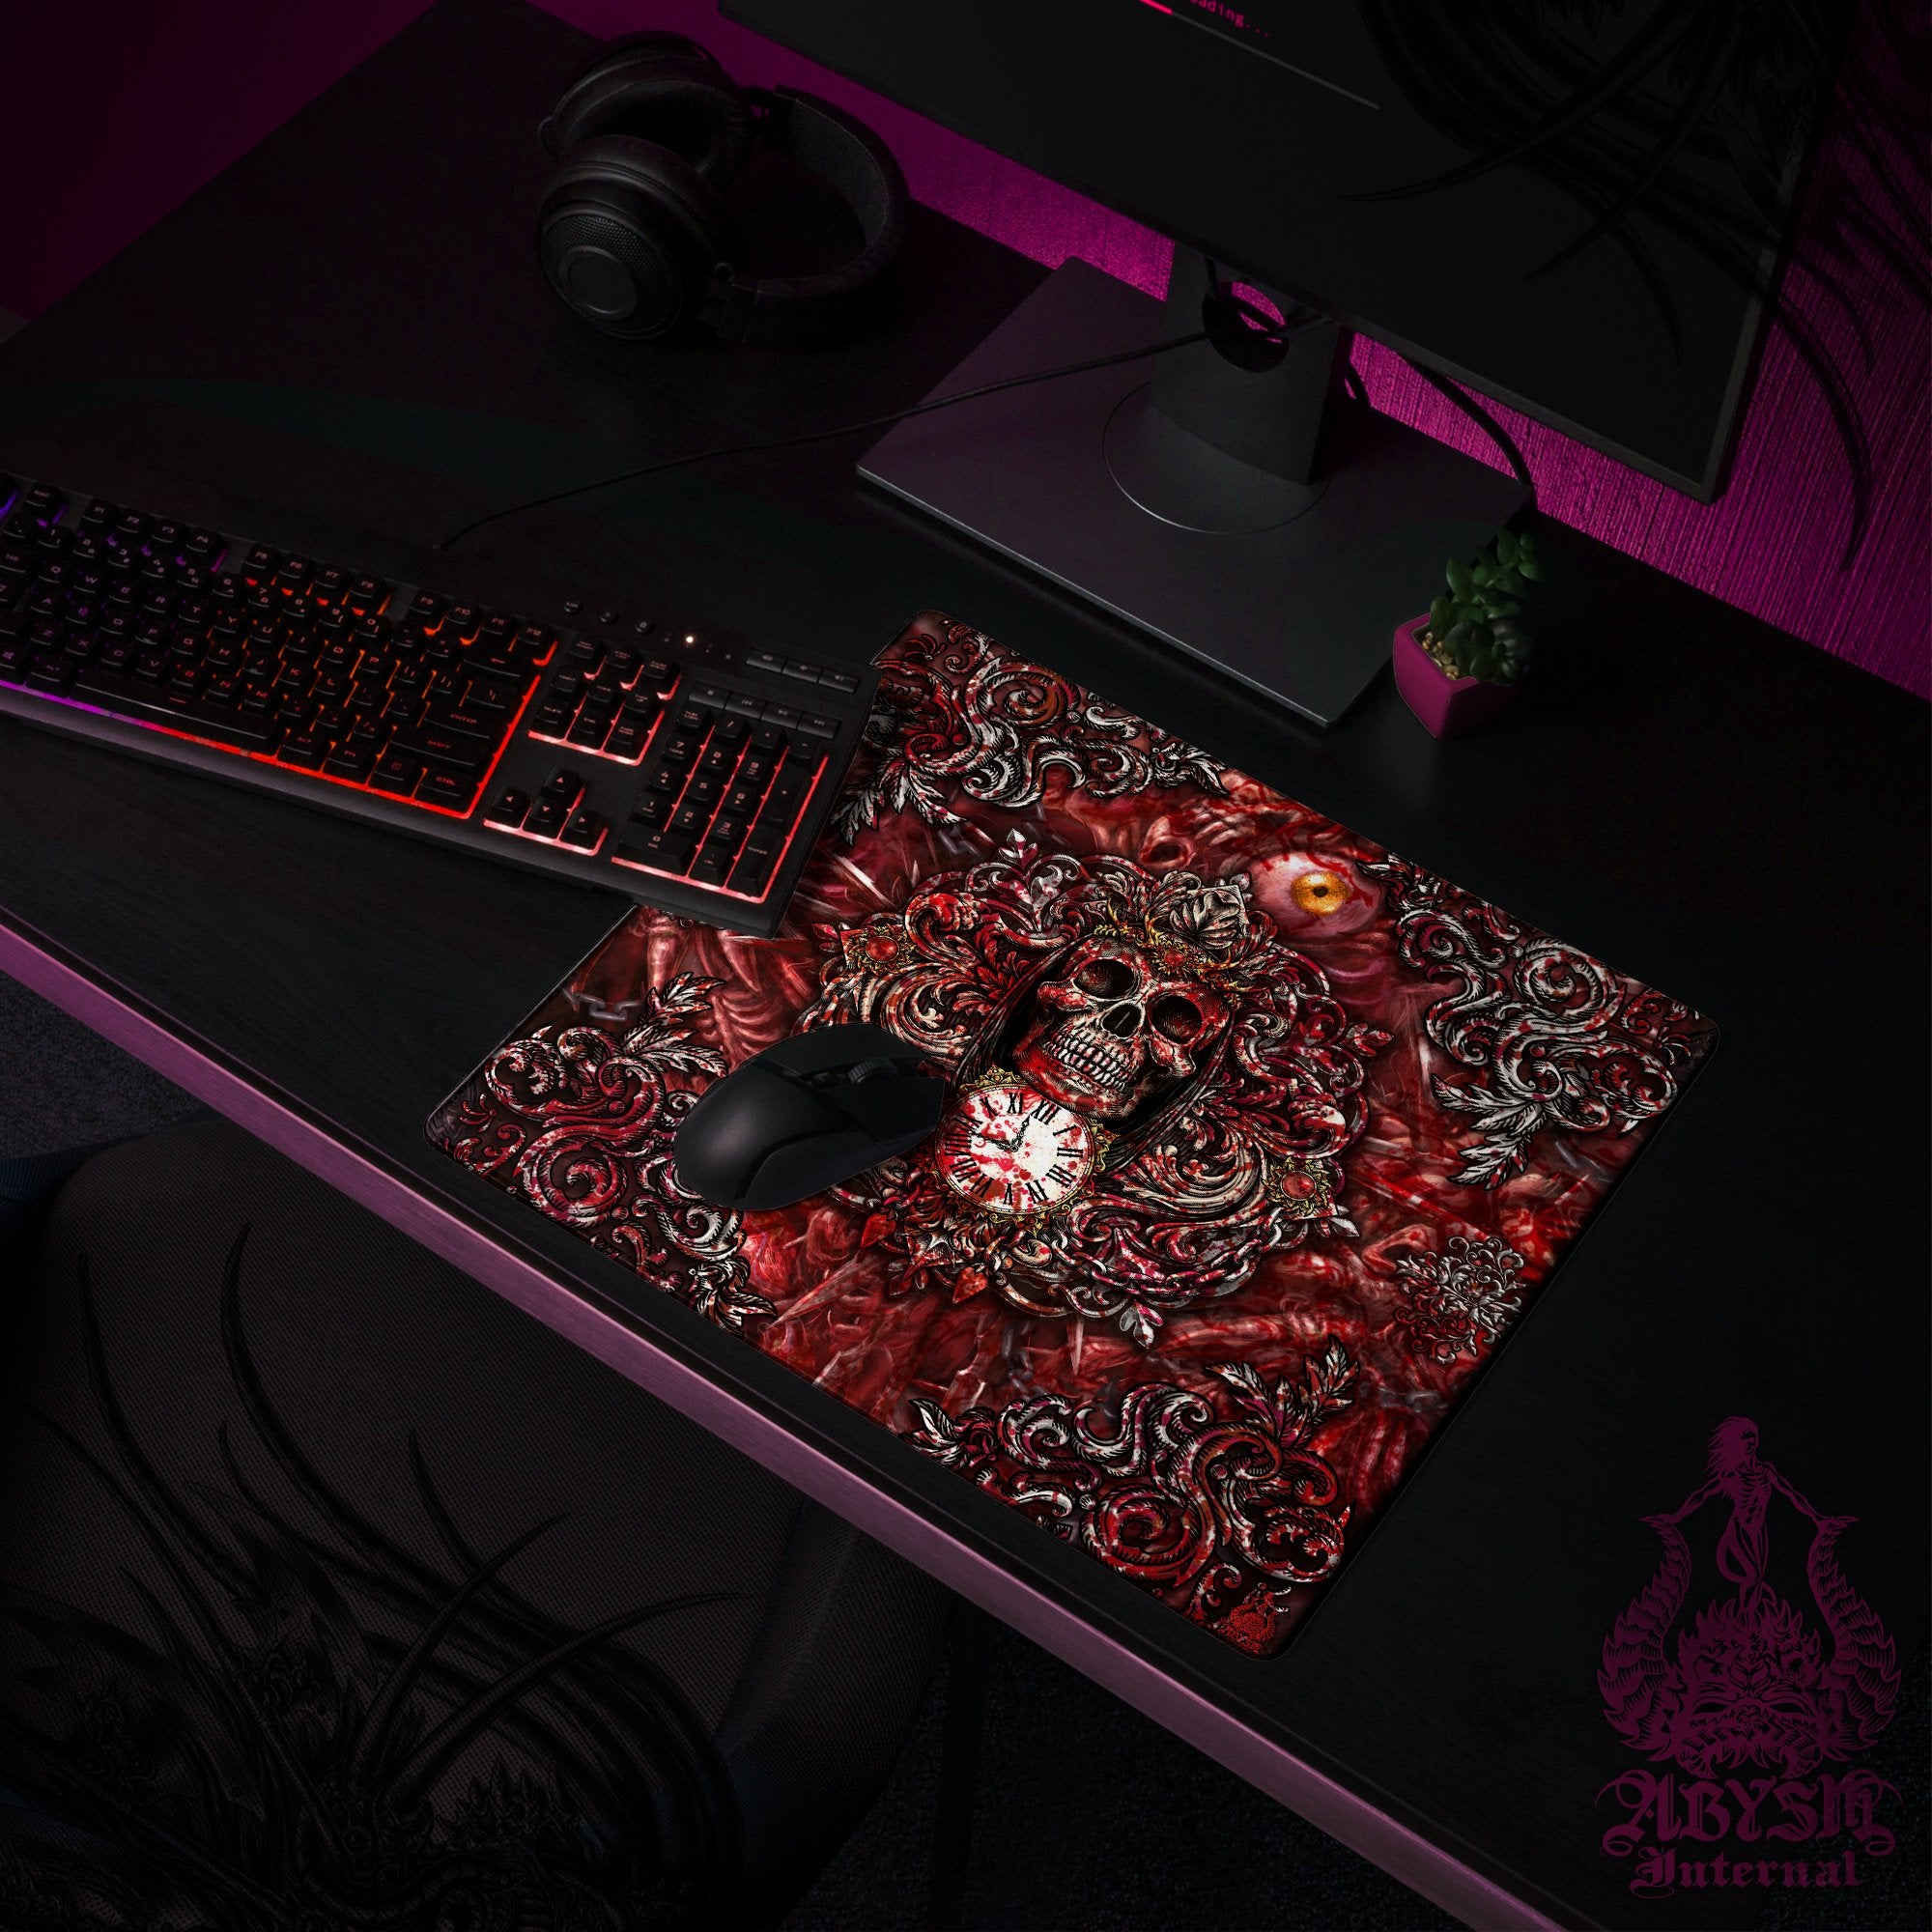 Horror Desk Mat, Grim Reaper Skull Gaming Mouse Pad, Halloween Table Protector Cover, Gore and Blood Workpad, Scary Dark Fantasy Art Print - Abysm Internal